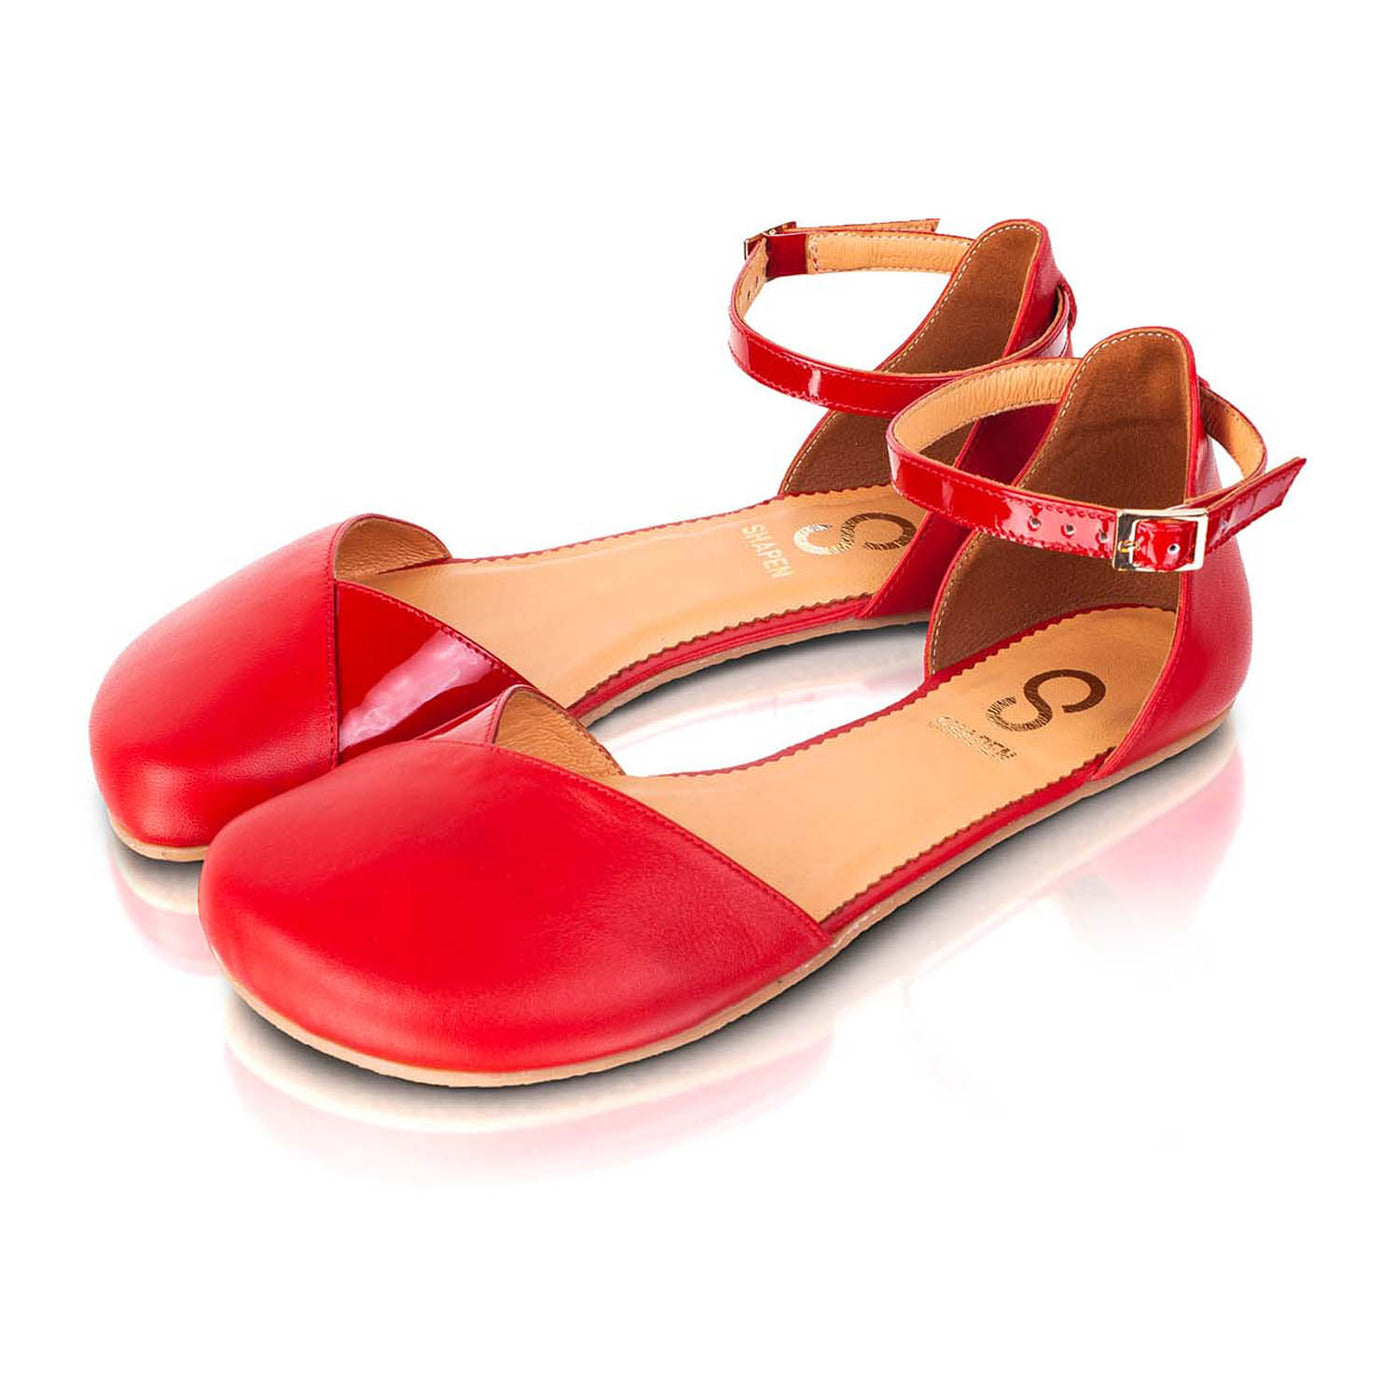 A photo of Shapen Poppy D’orsay dressy flats with a leather upper and rubber soles. The flats are a cherry red color with a heel cup and dainty ankle strap, the inside of the sole are a beige color. Both flats are shown beside each other turned with the right shoe towards the front against a white background. #color_red